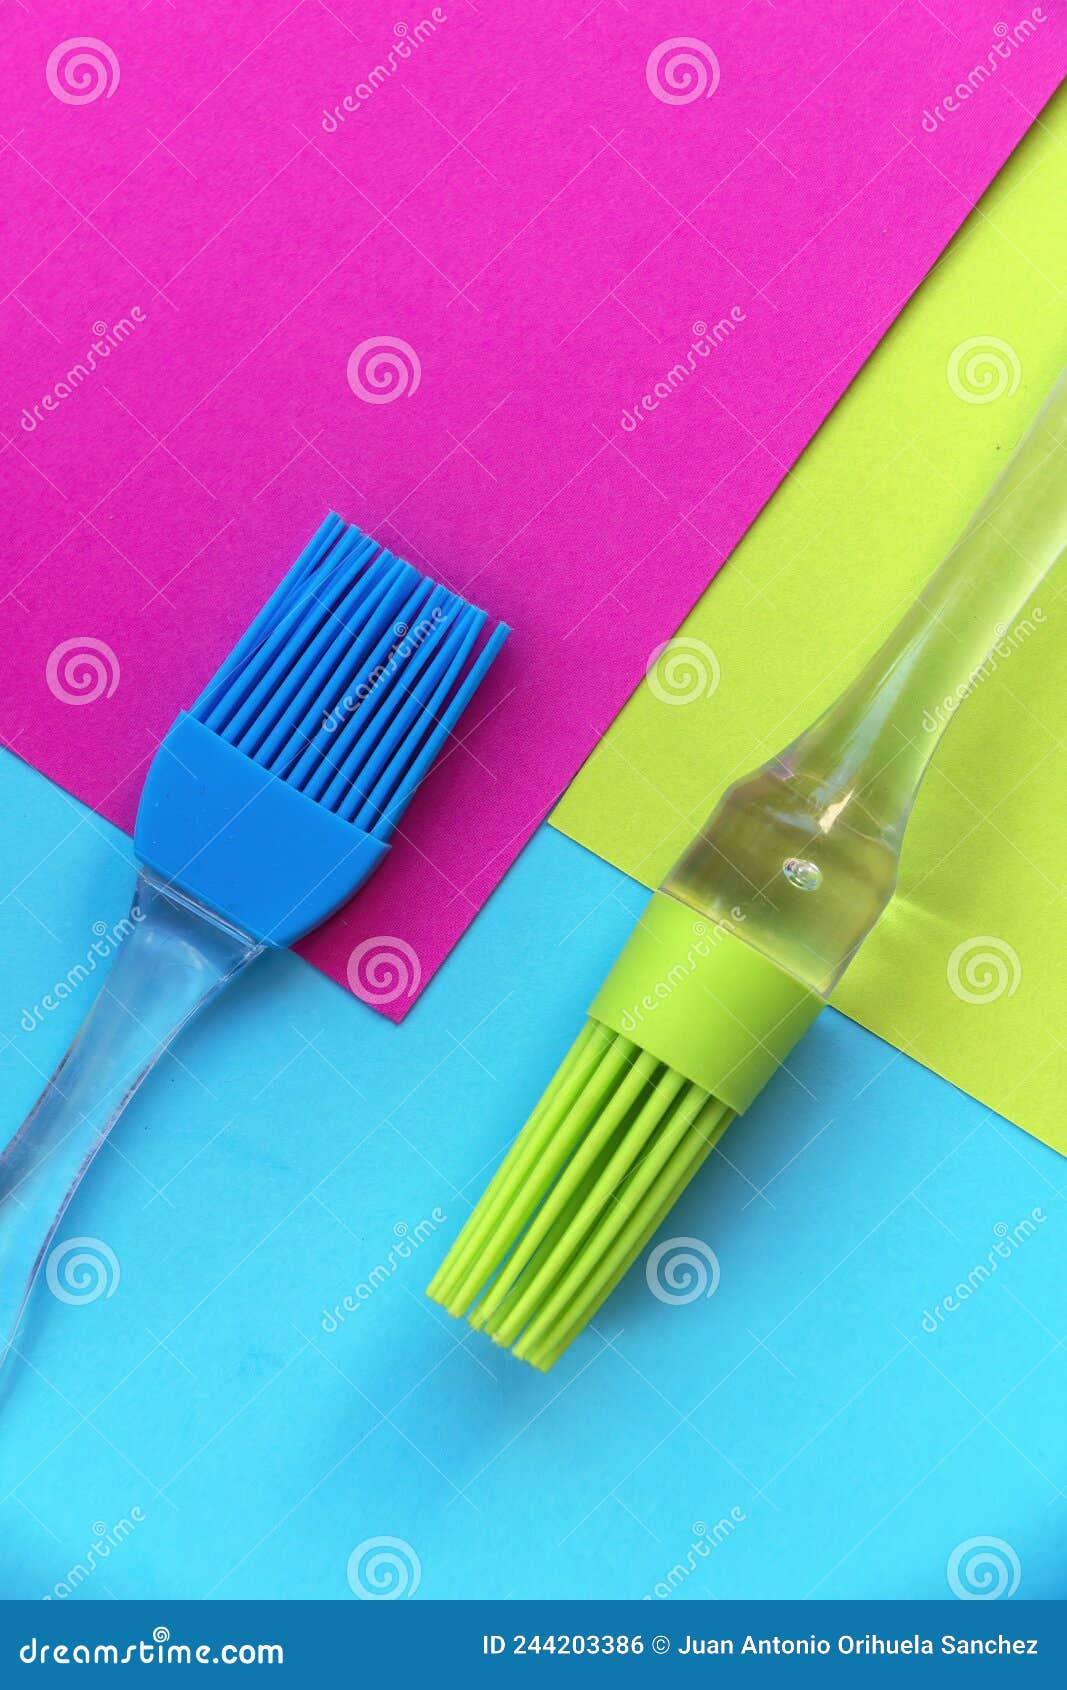 silicone brushes on bright colored geometric background